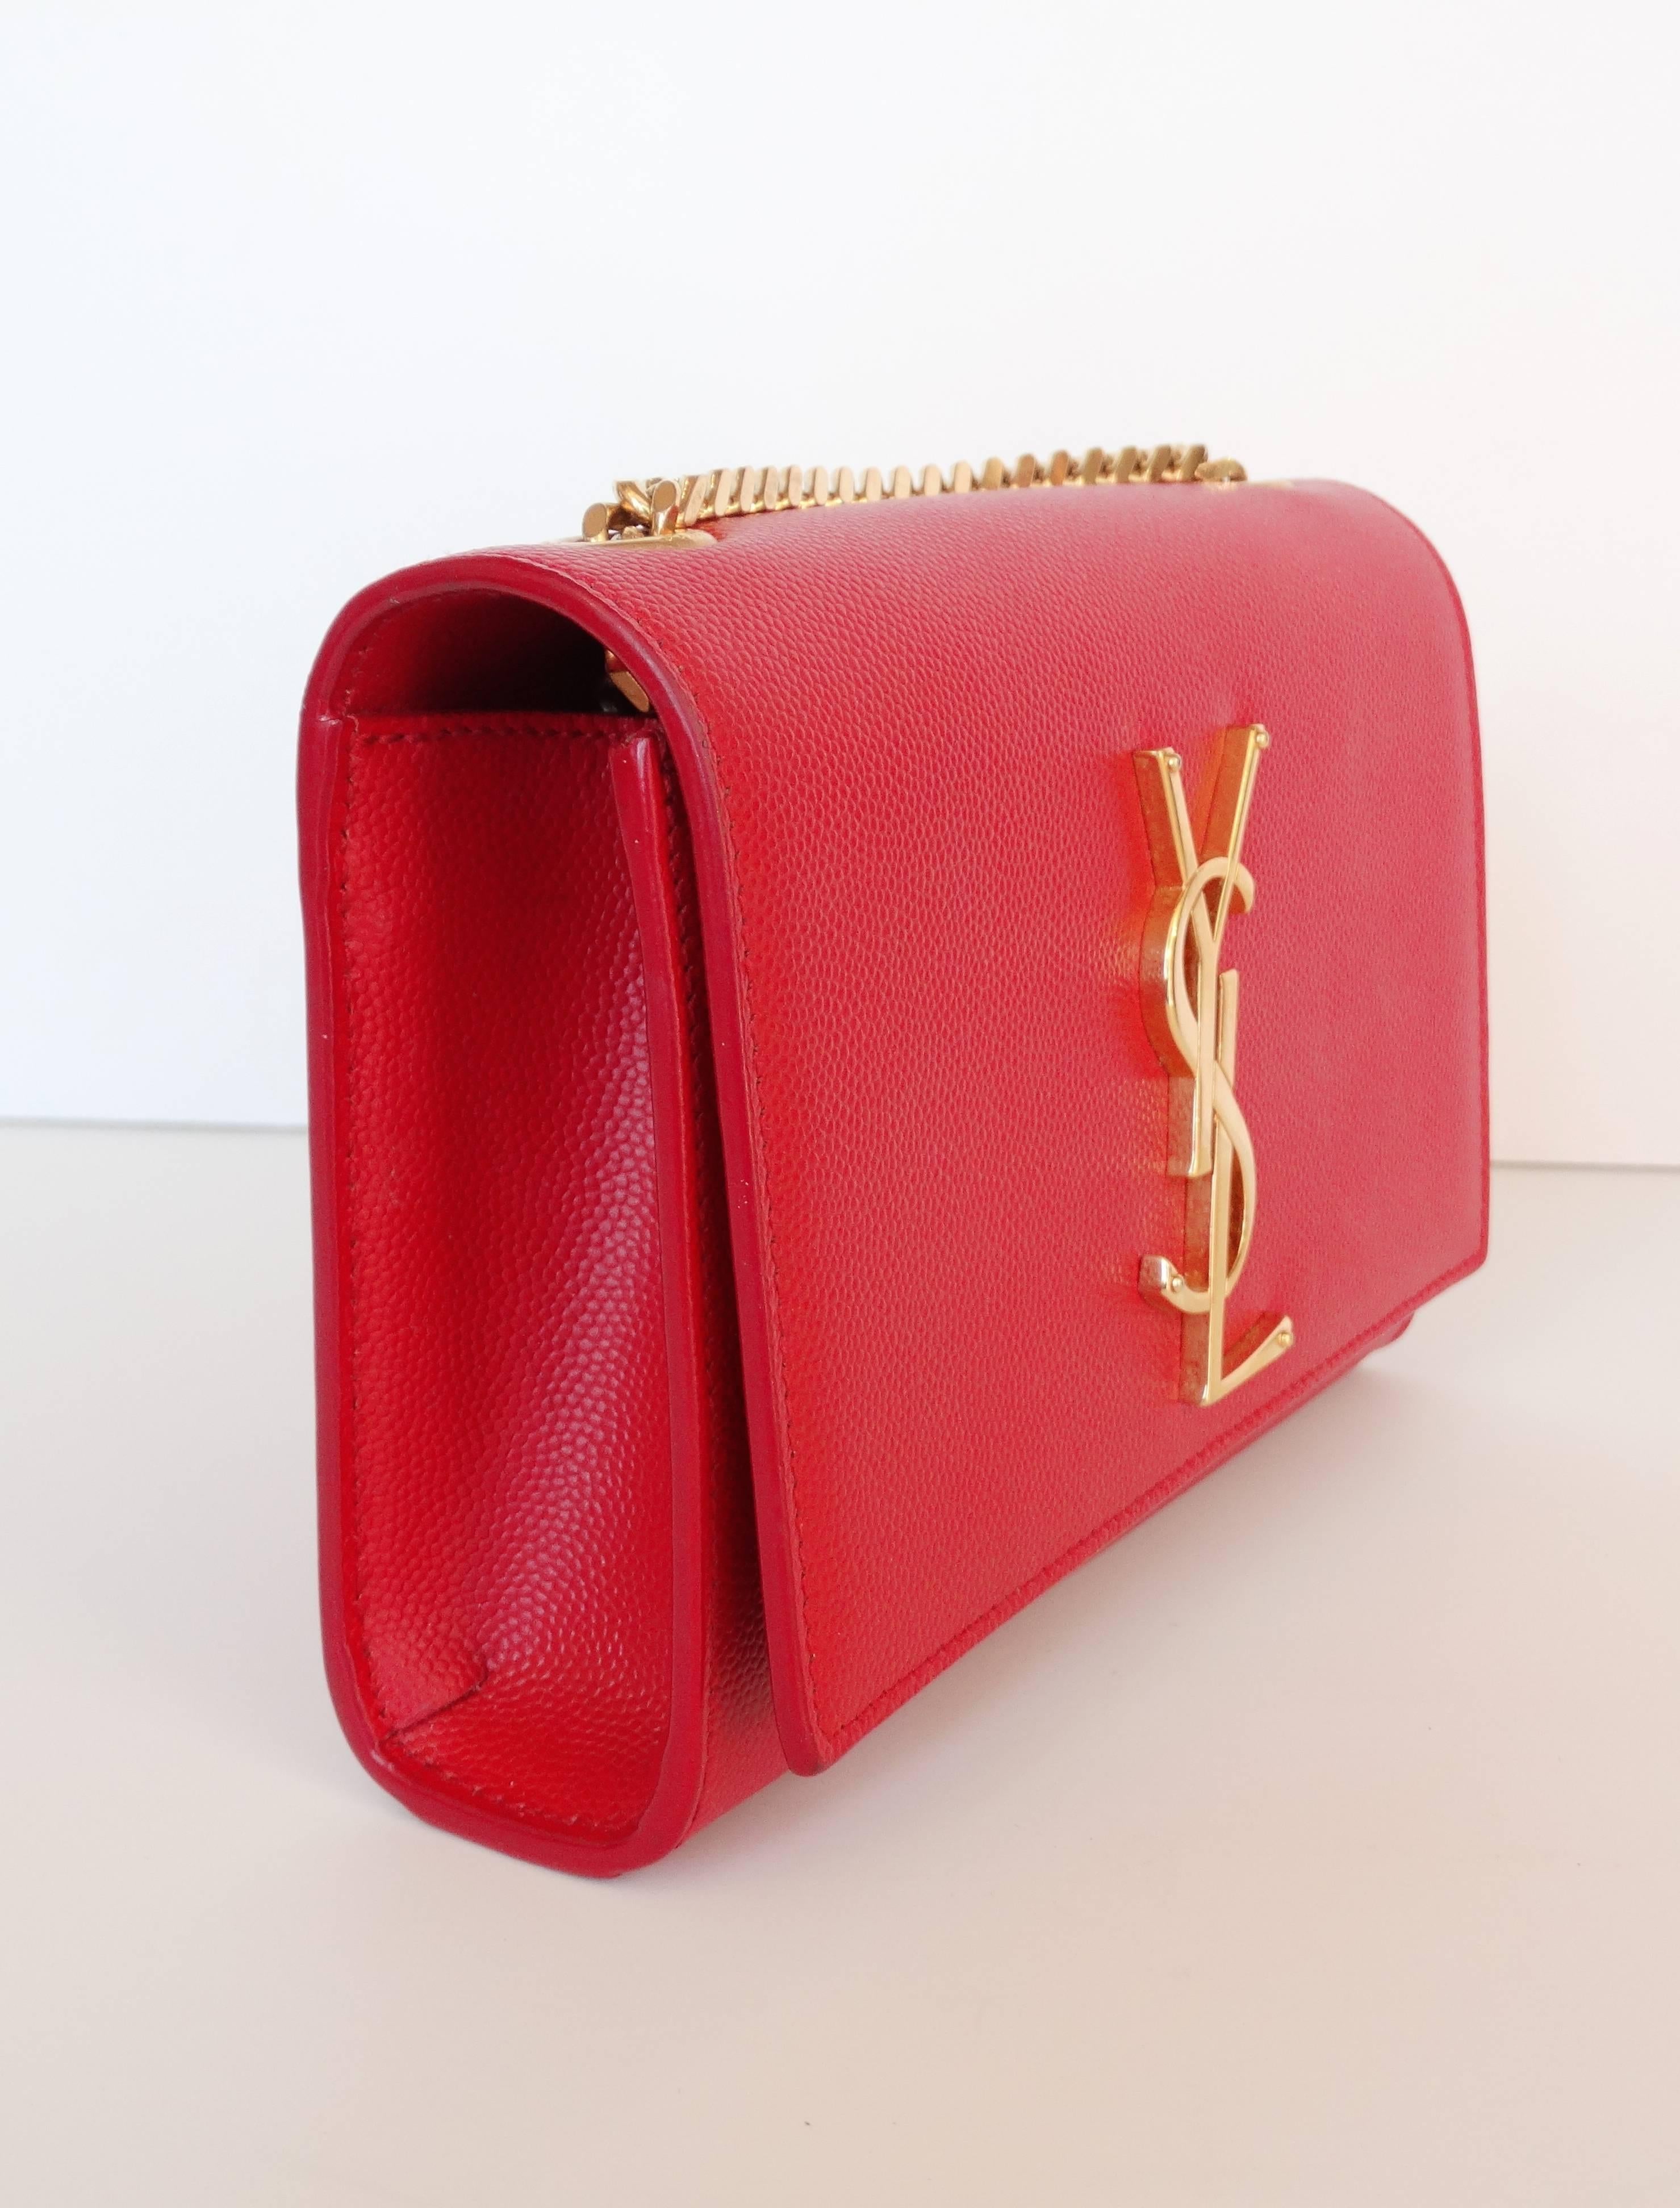 Your perfect evening bag has landed! Add a pop of color to your looks with our Yves Saint Laurent cross-body bag! Made of a quality solid red leather accented with contrasting gold metal accents. YSL metal accent on the front of the bag with